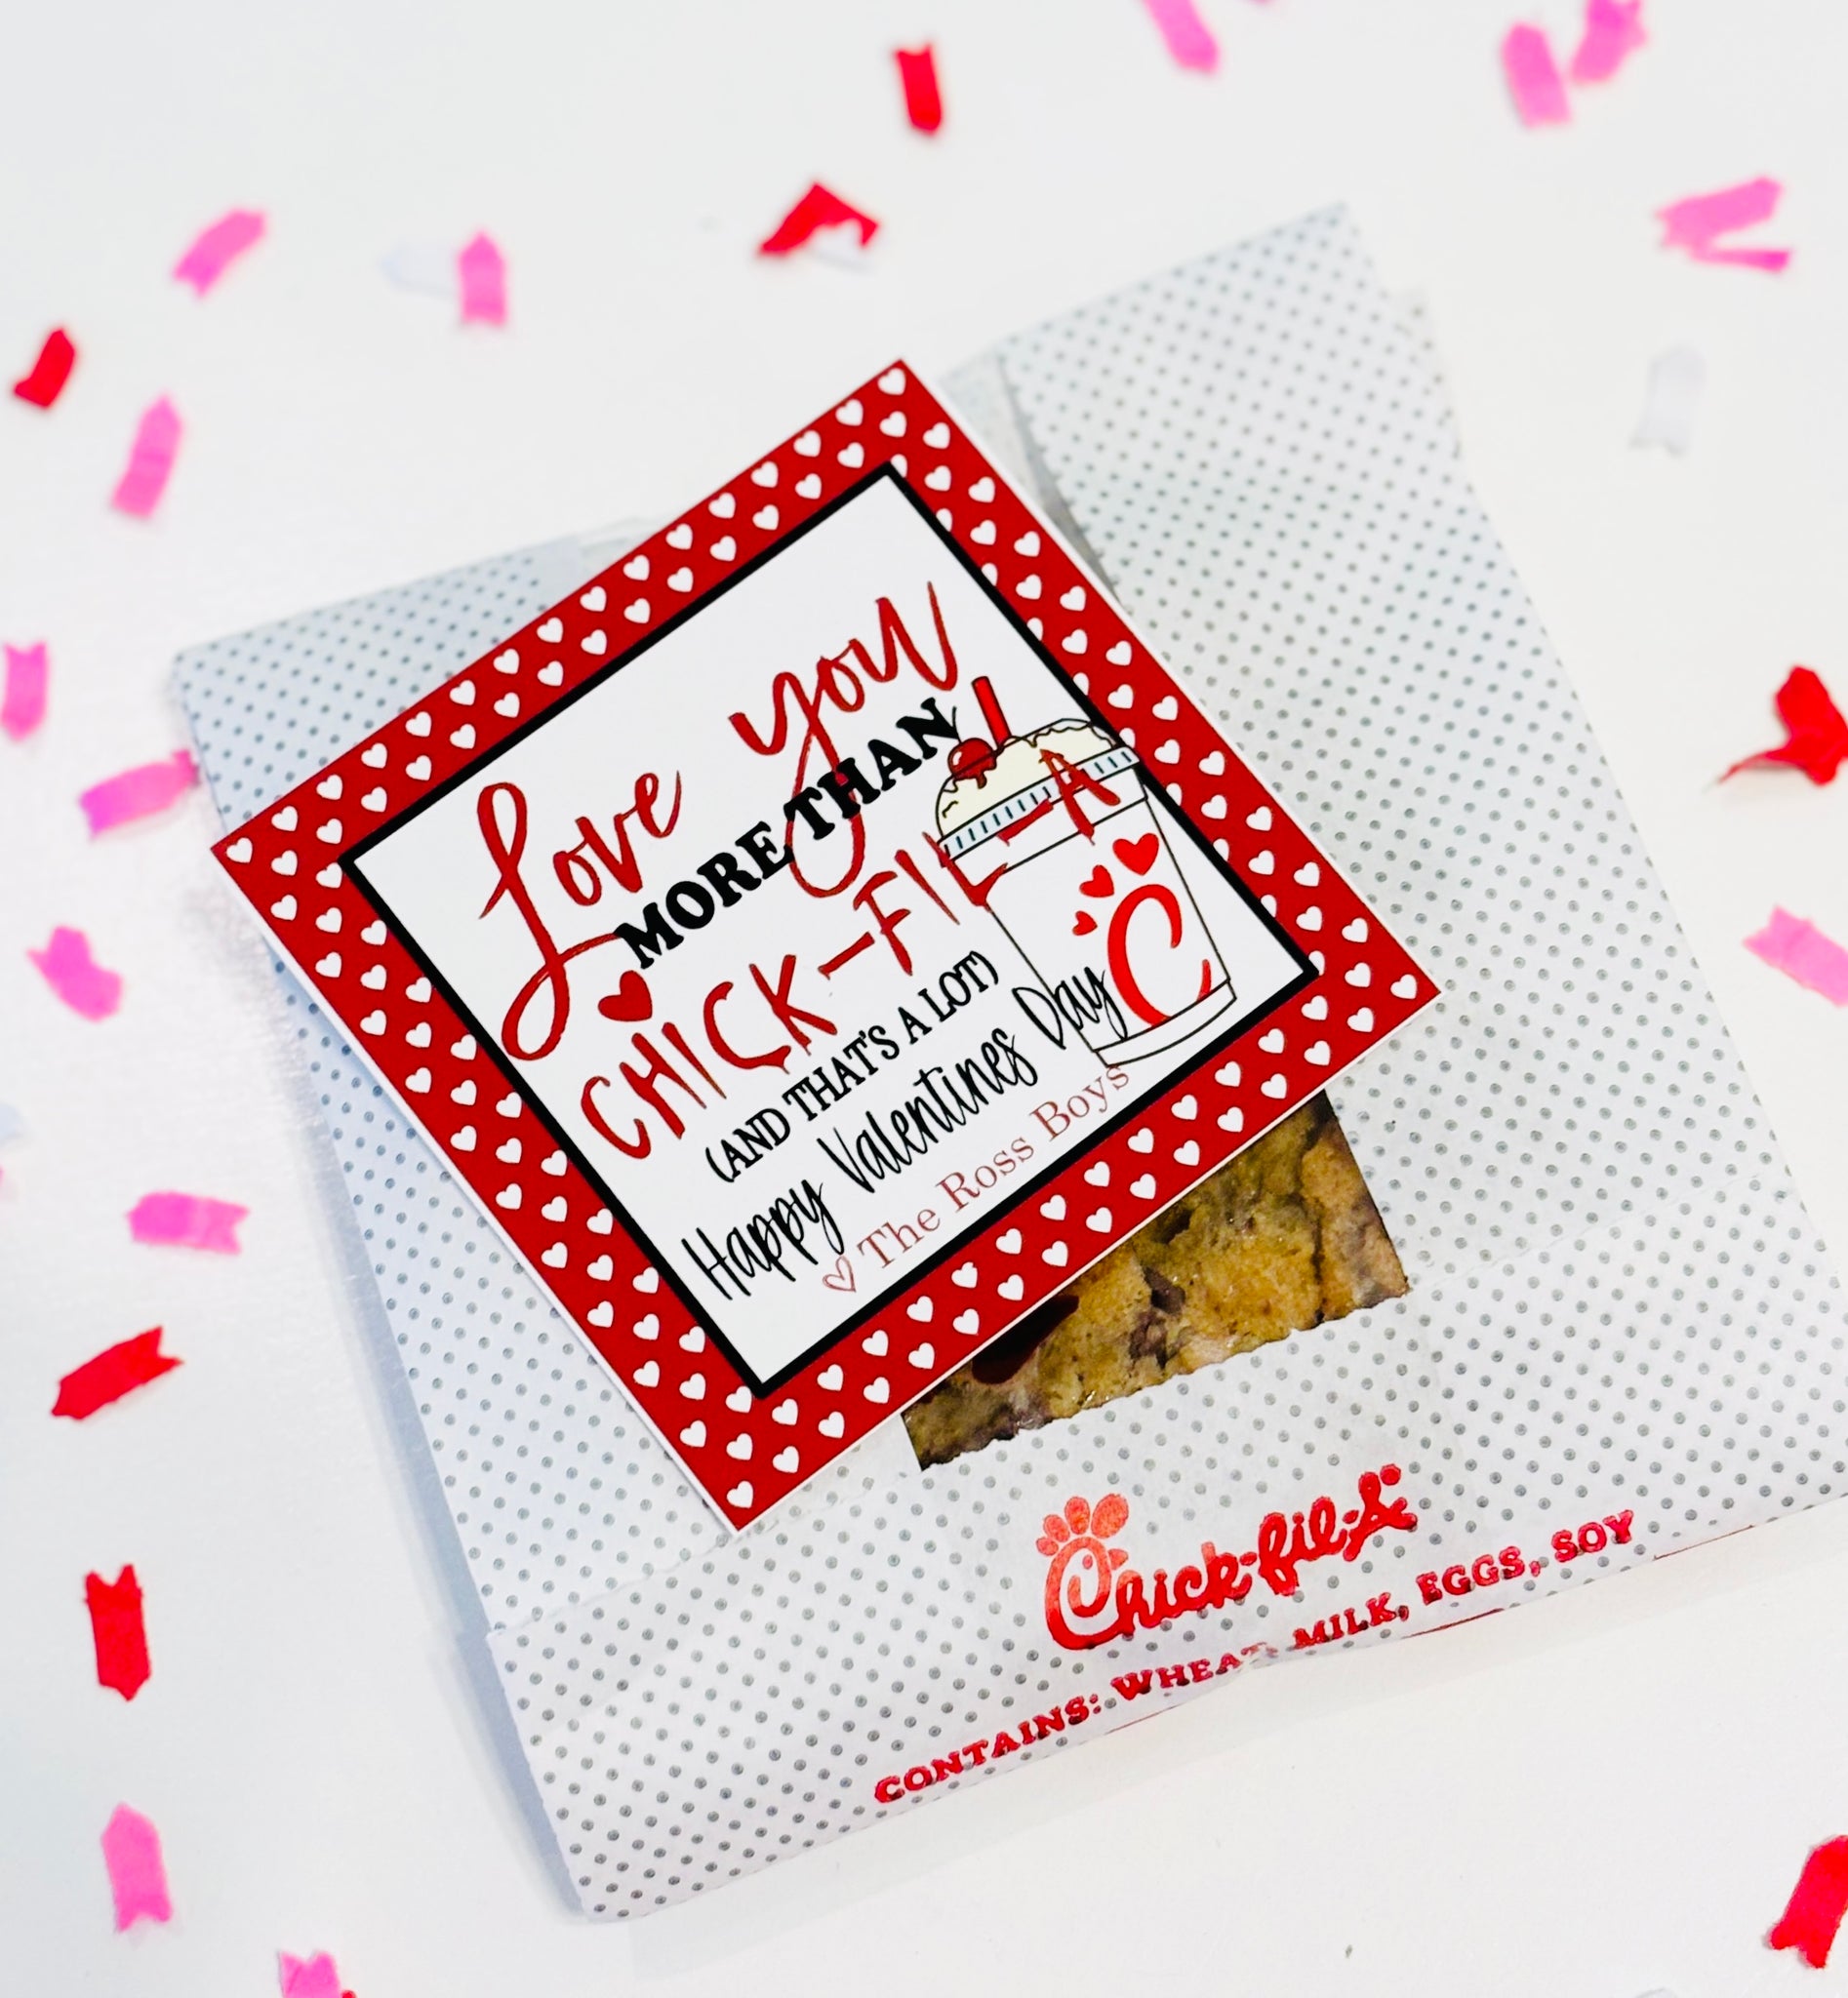 I love you more than Chick-Fil-A-Gift Tags